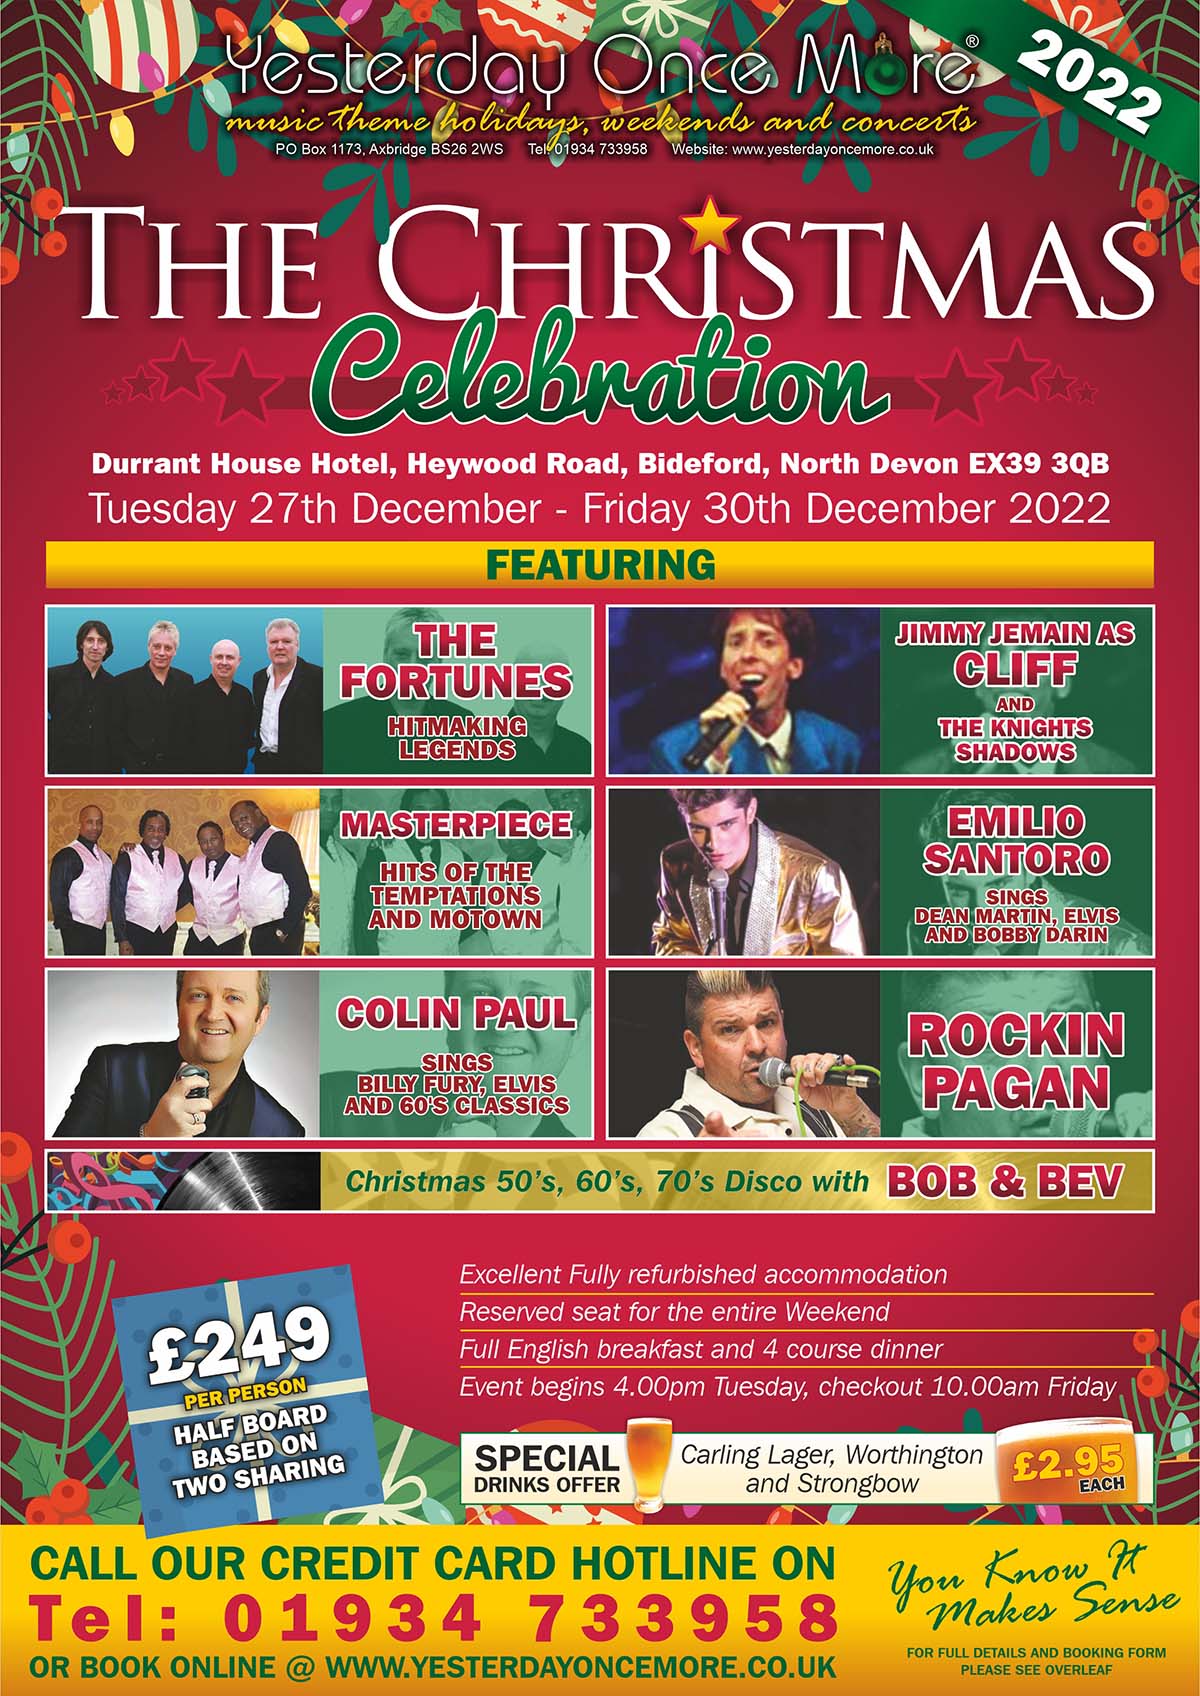 Yesterday Once More Poster advertising Christmas Music Break at the Durrant House Hotel in North Devon